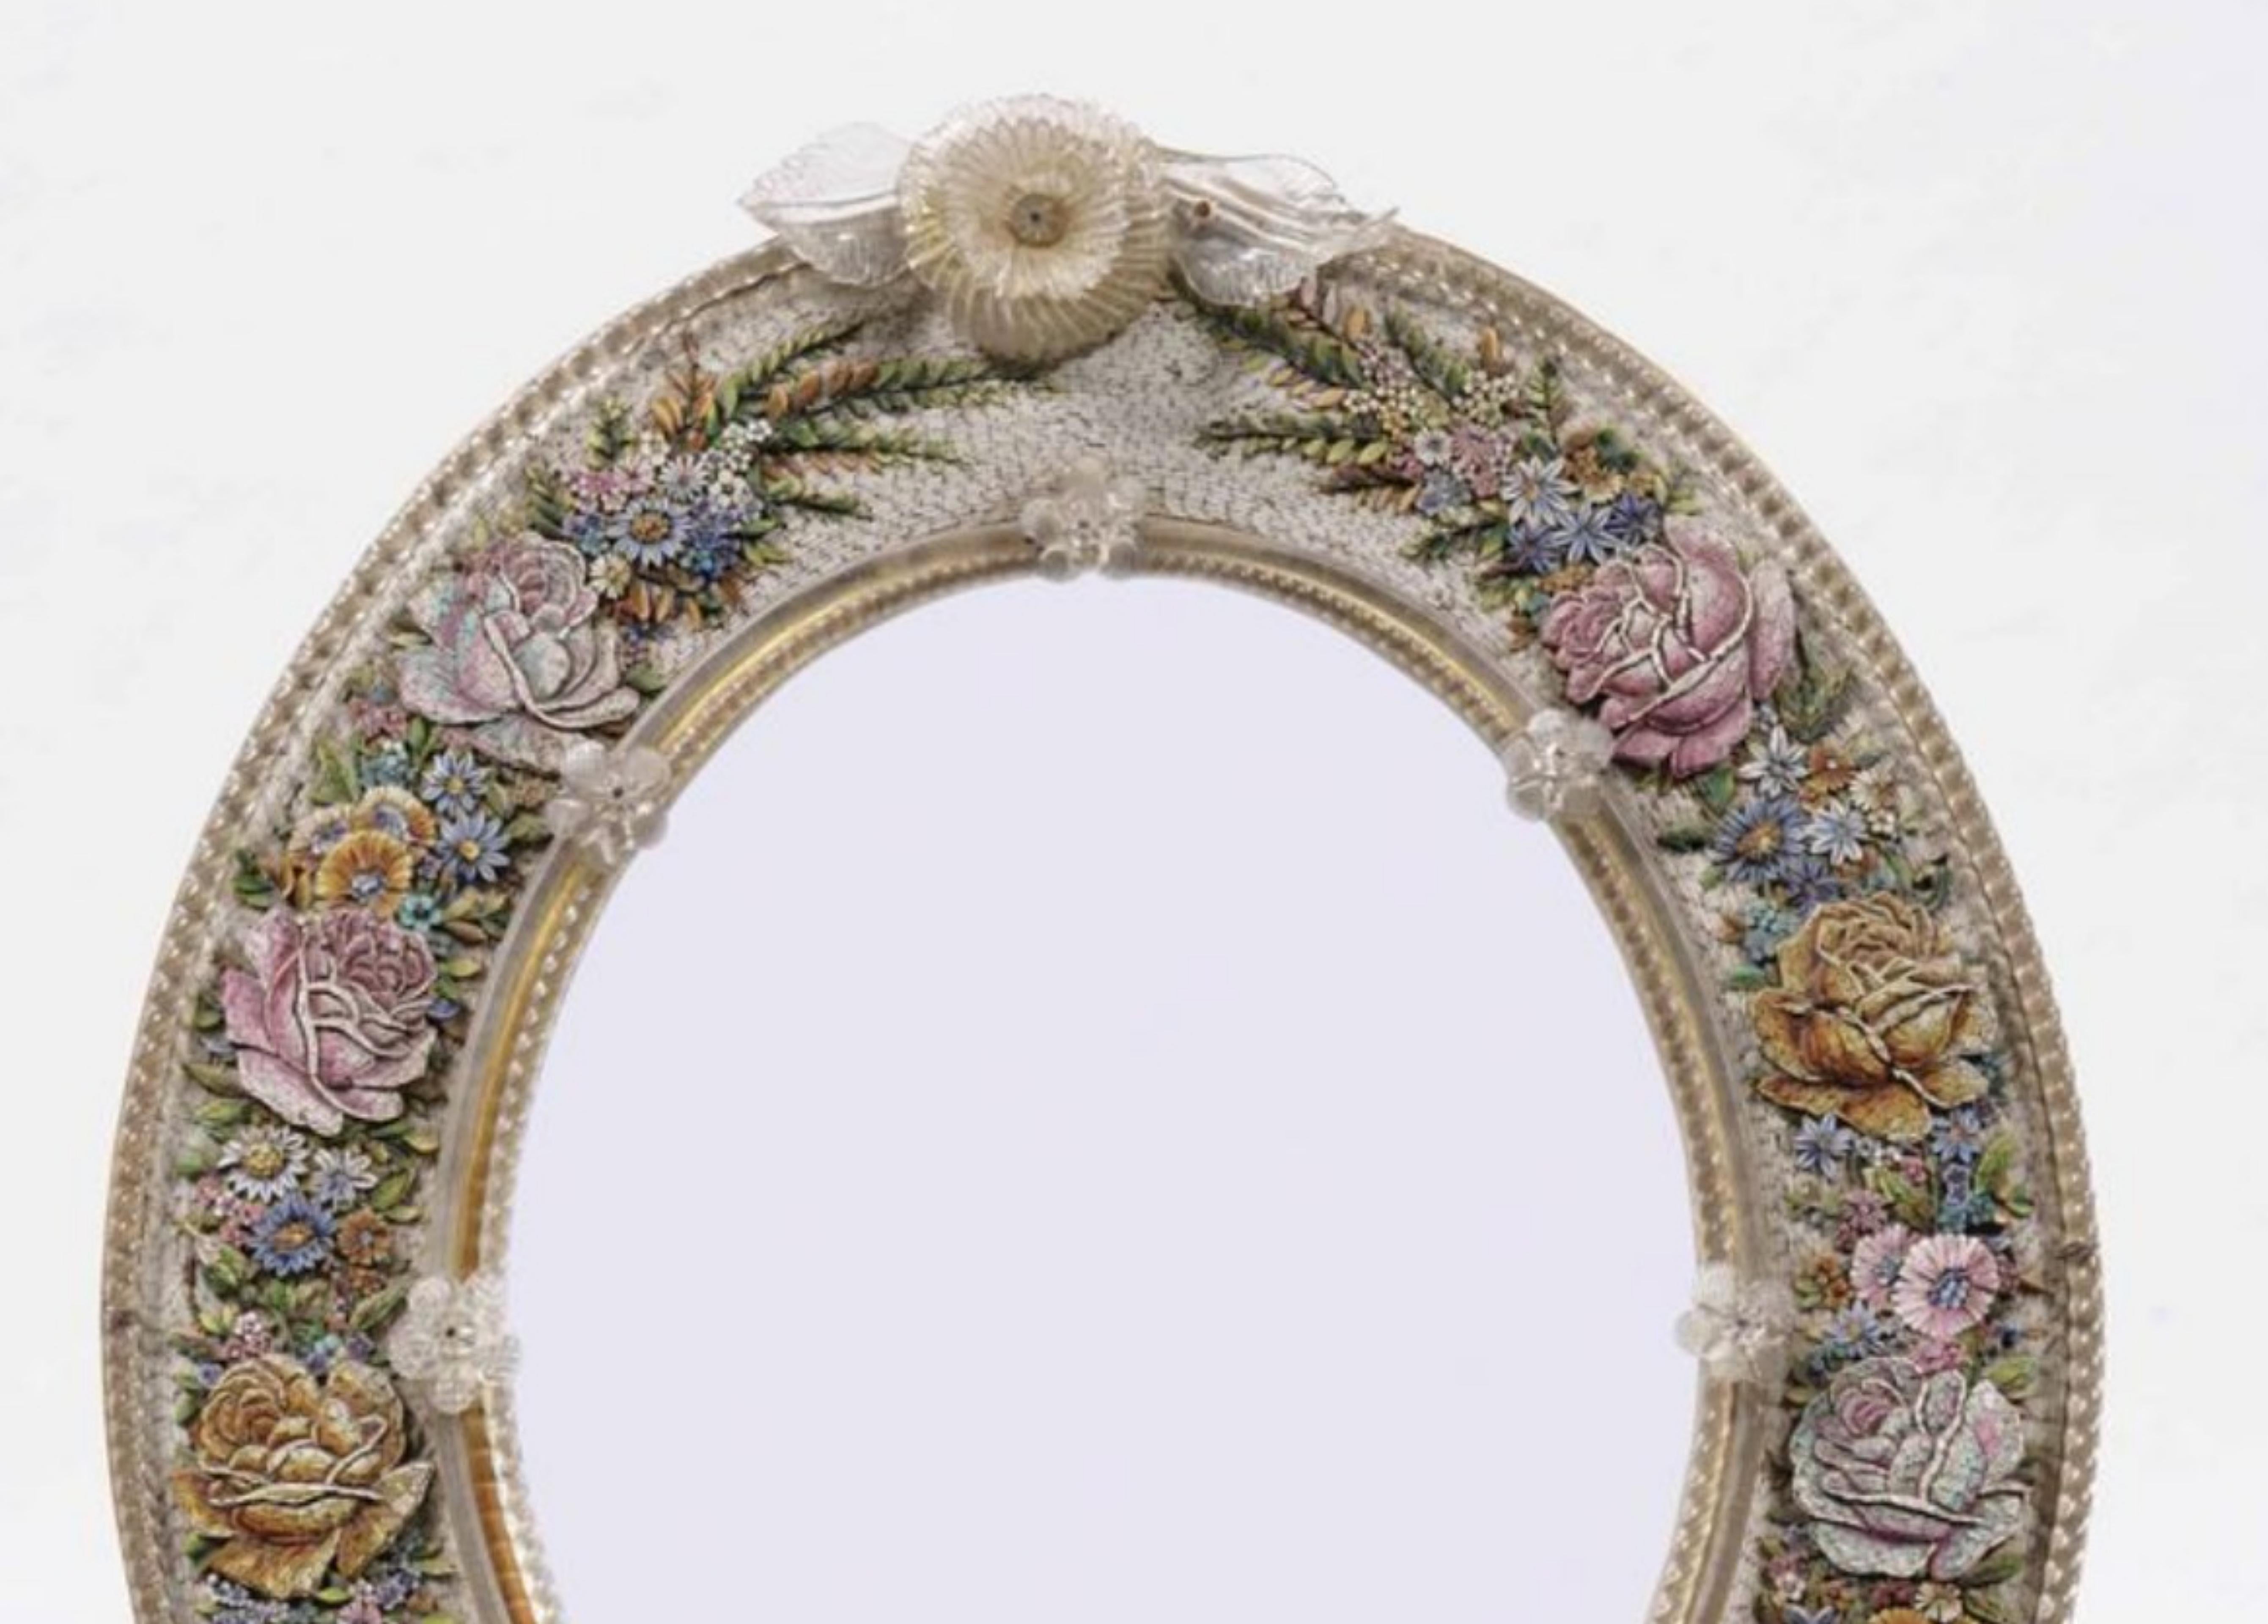 Italian Oval Venetian Mirror with Floral Micromosaic Frame.  20th century